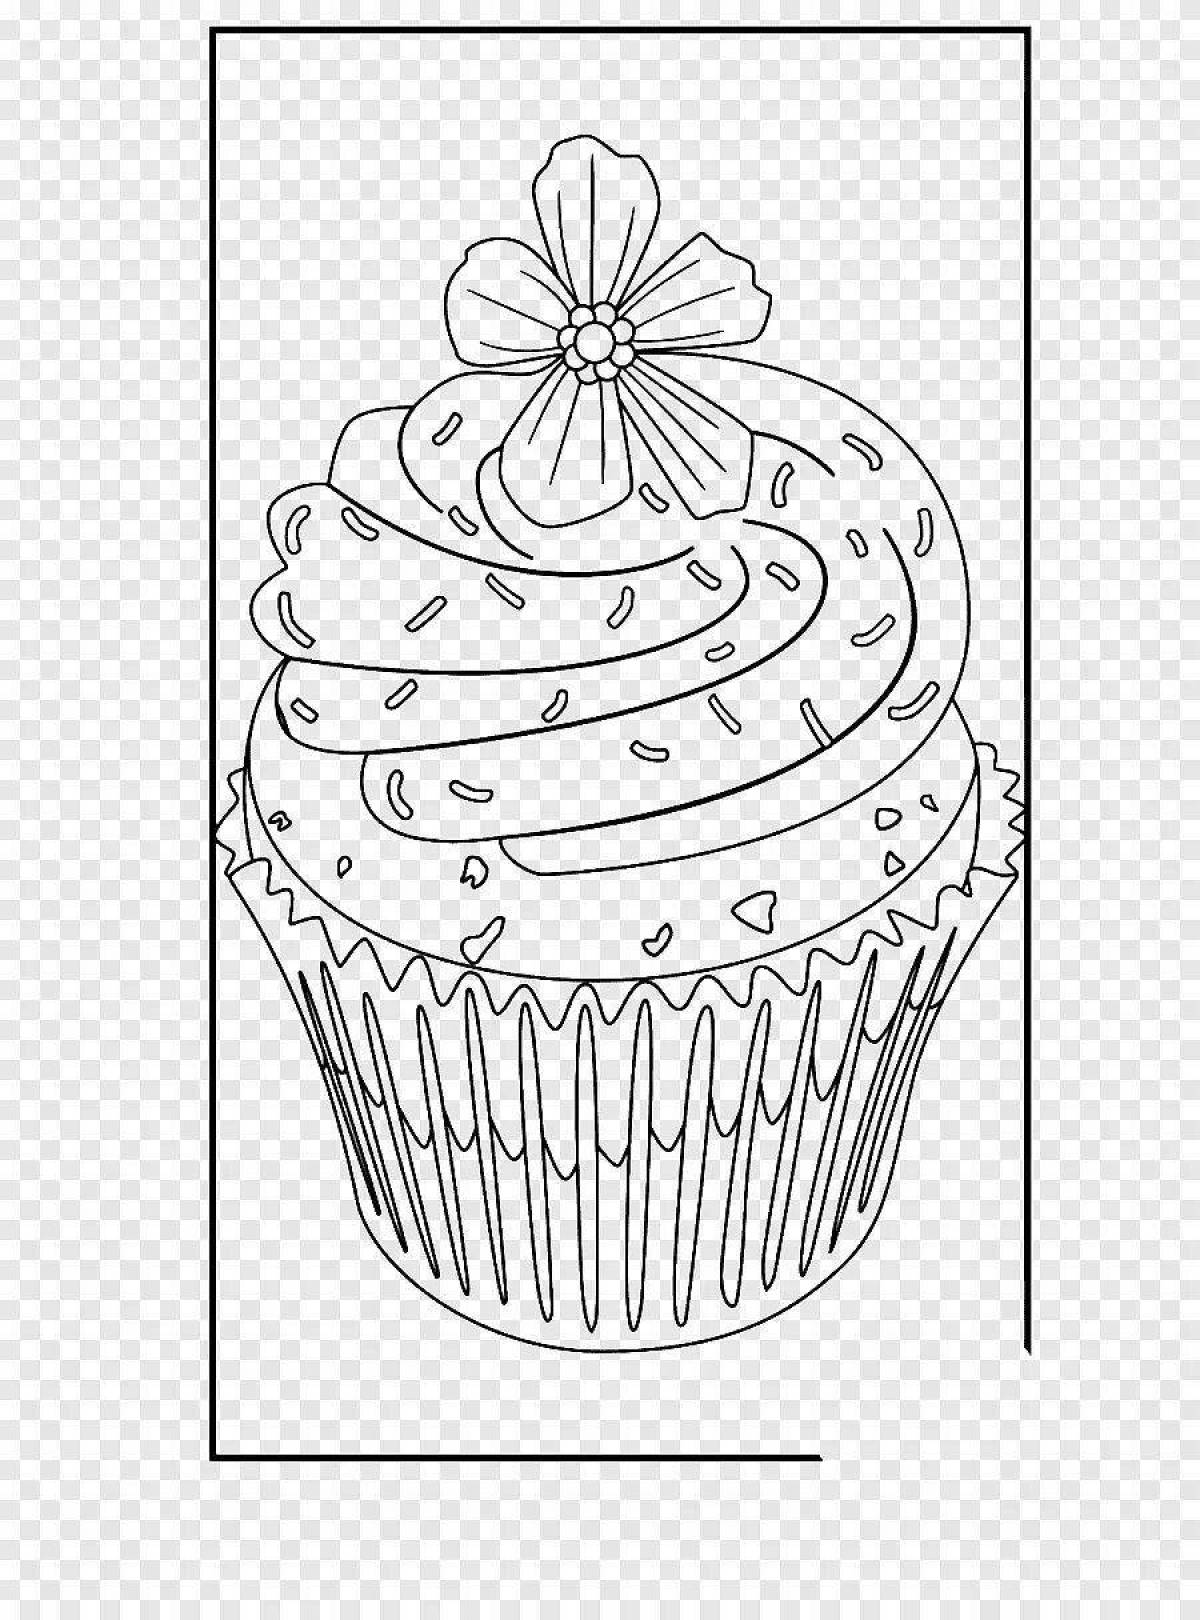 Fragrant chocolate cake coloring page